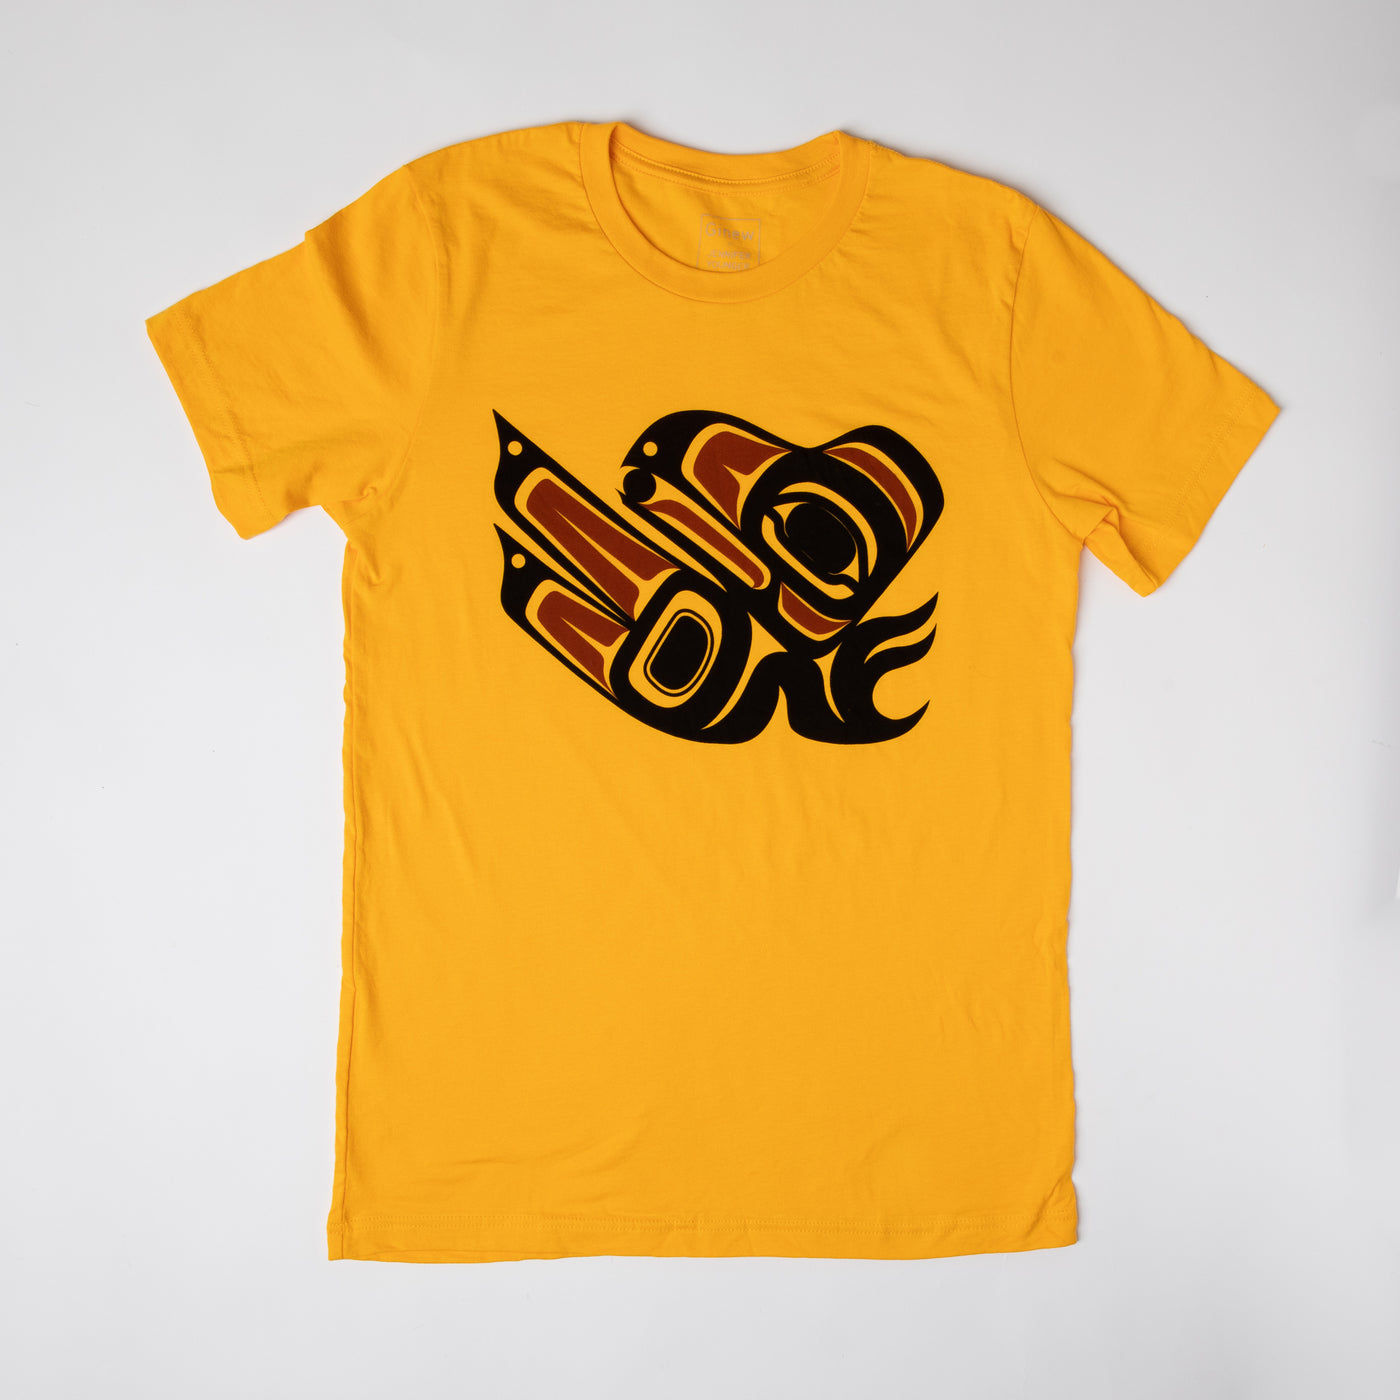 Yellow tee shirt laying flat on a neutral background. The tee shirt has a graphic design of a Raven in black and red ink.